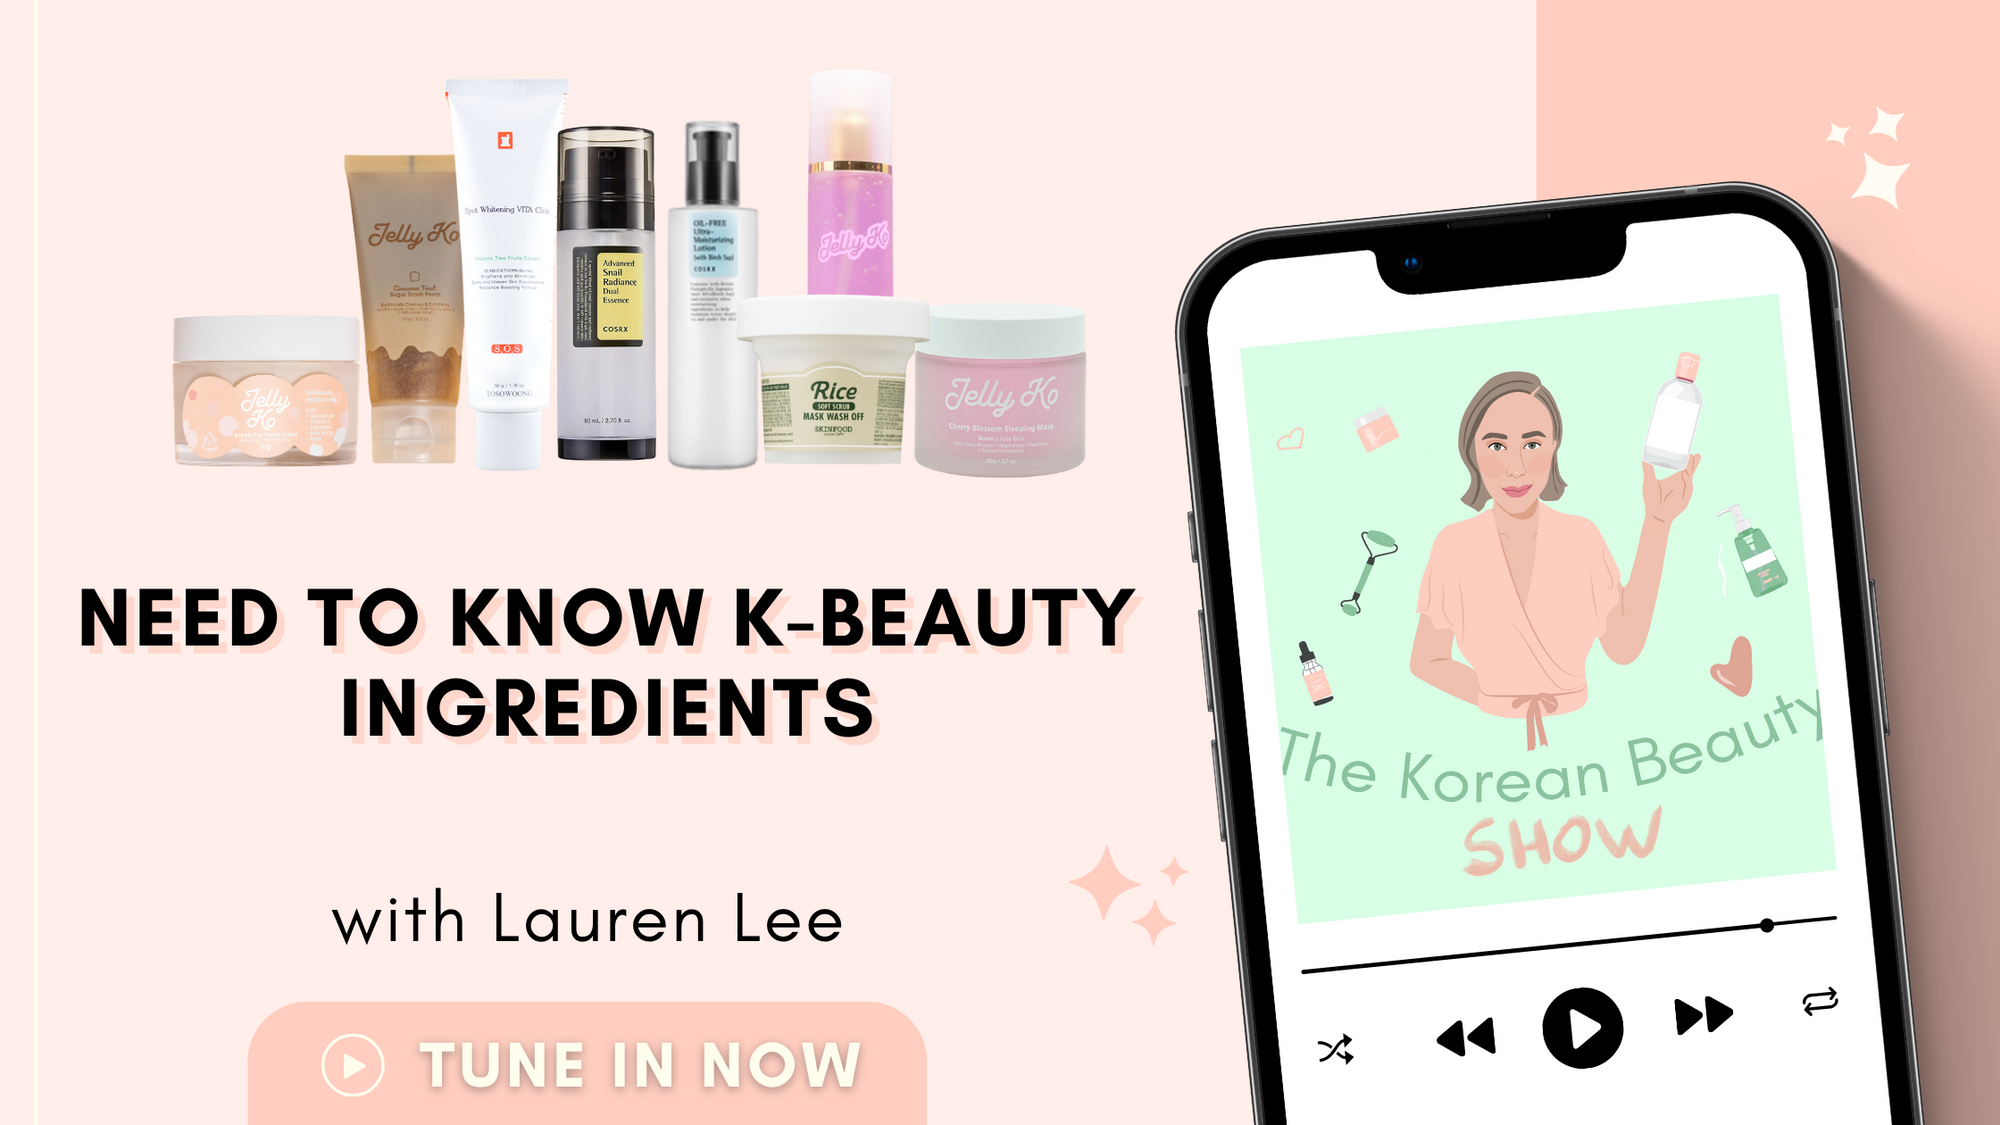 Need to Know K-Beauty Ingredients